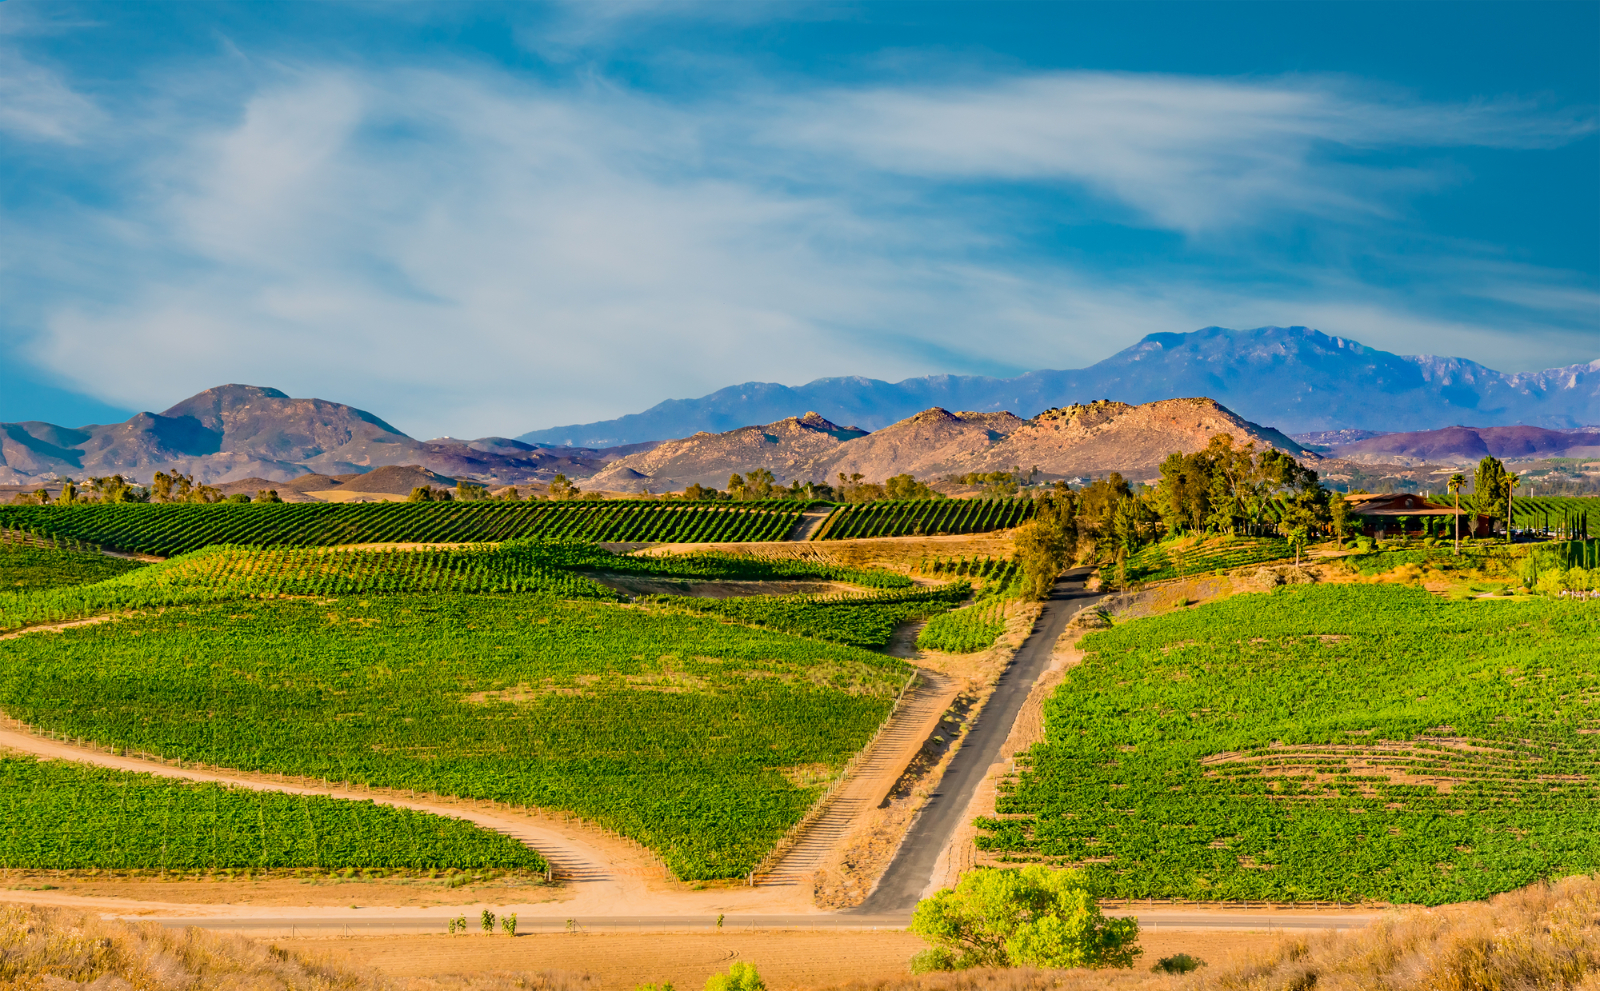 Ride in Luxury Transportation During Your Temecula Wine Tour